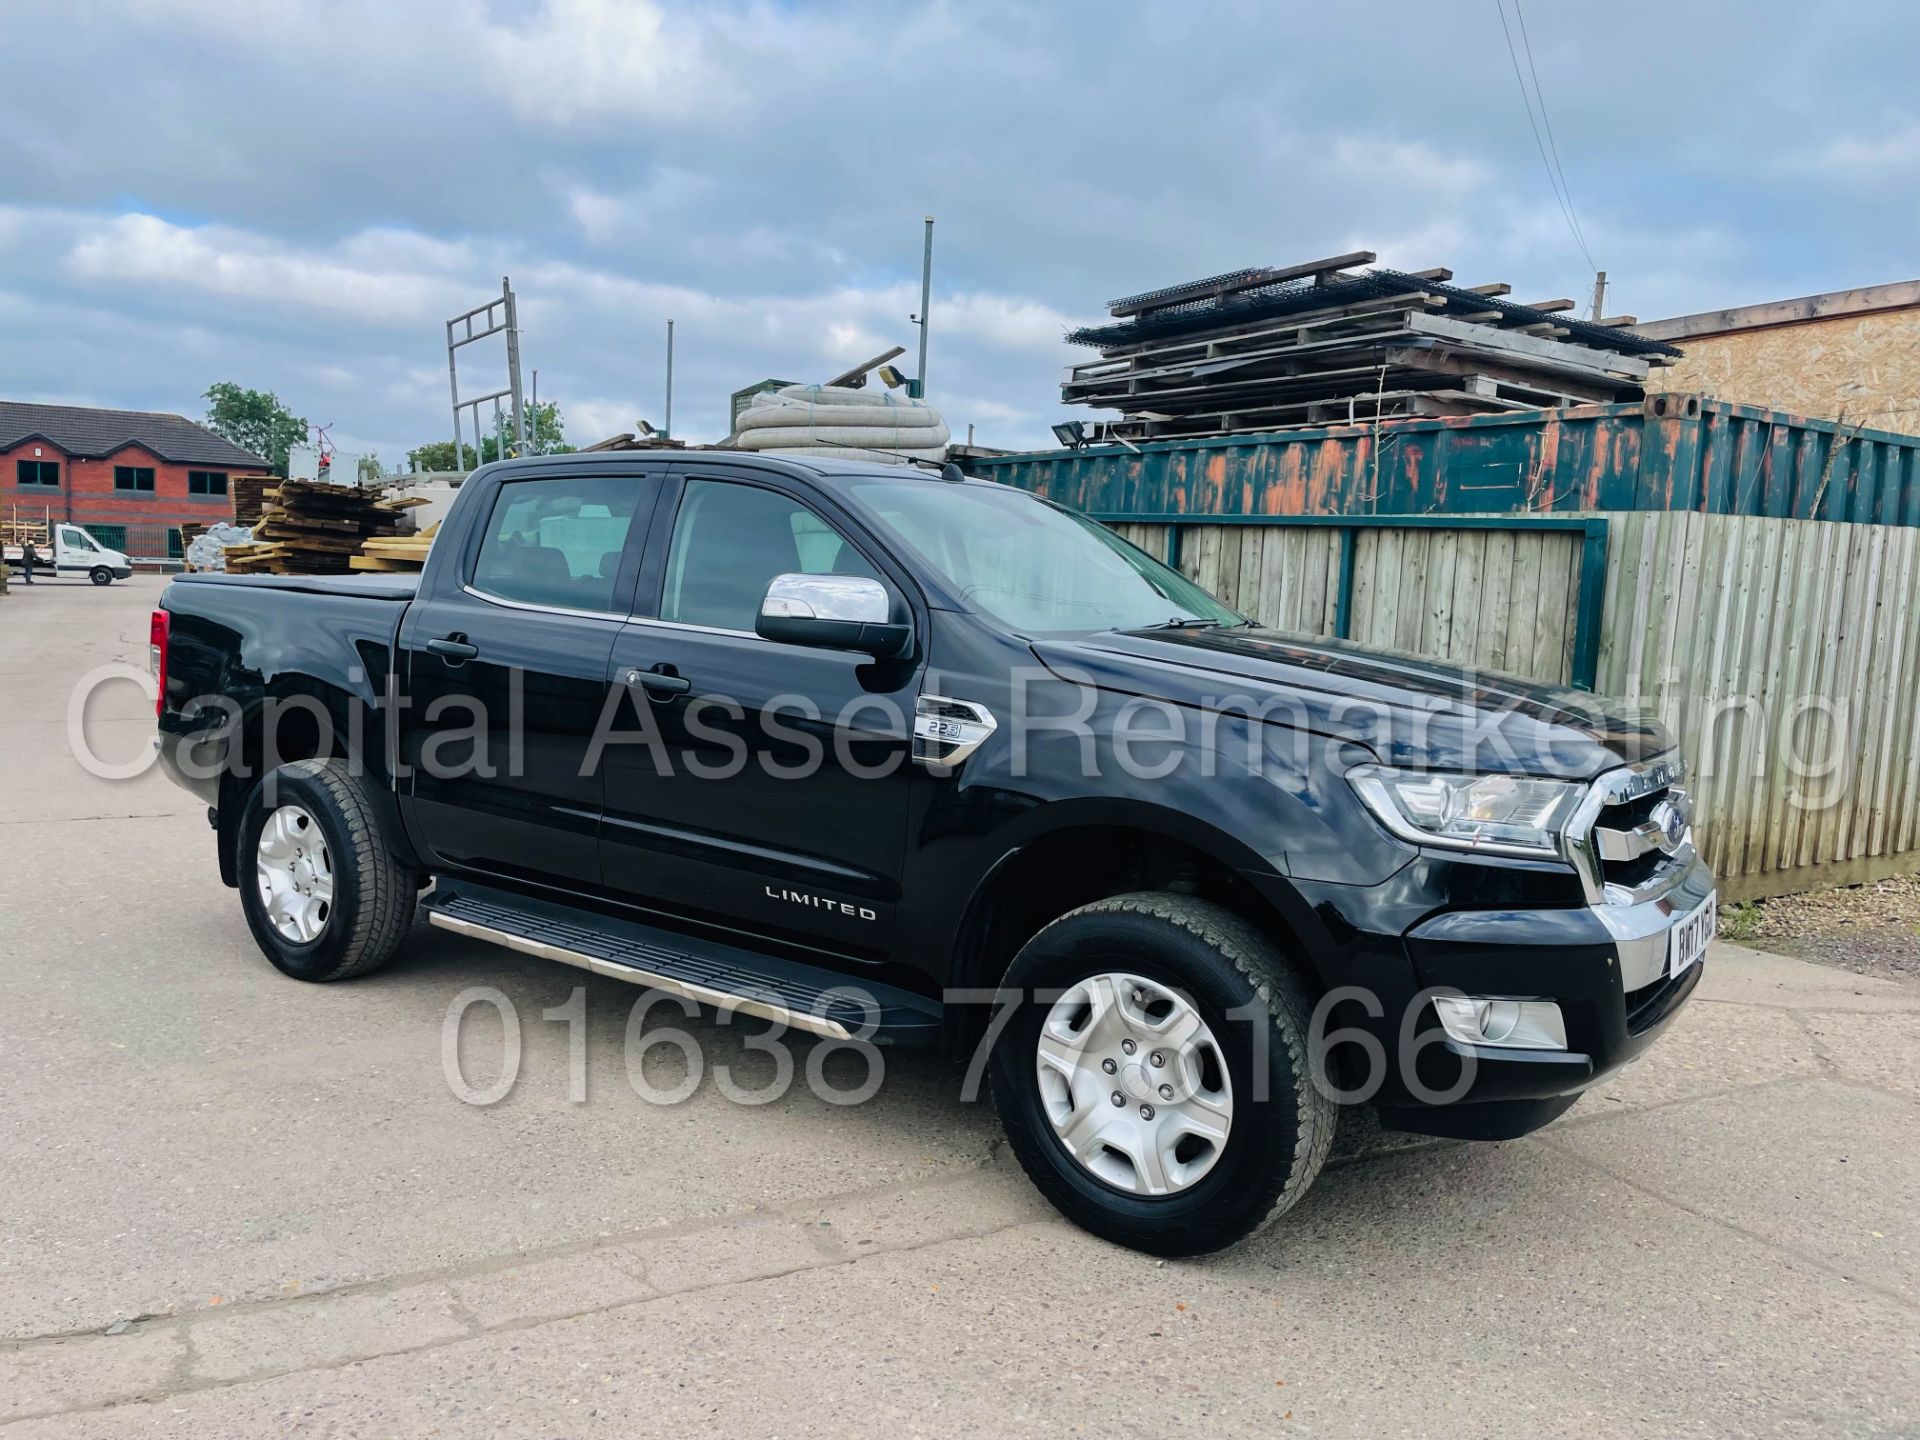 (On Sale) FORD RANGER *LIMITED EDITION* DOUBLE CAB PICK-UP (2017 -EURO 6) 'AUTO - LEATHER' (1 OWNER)